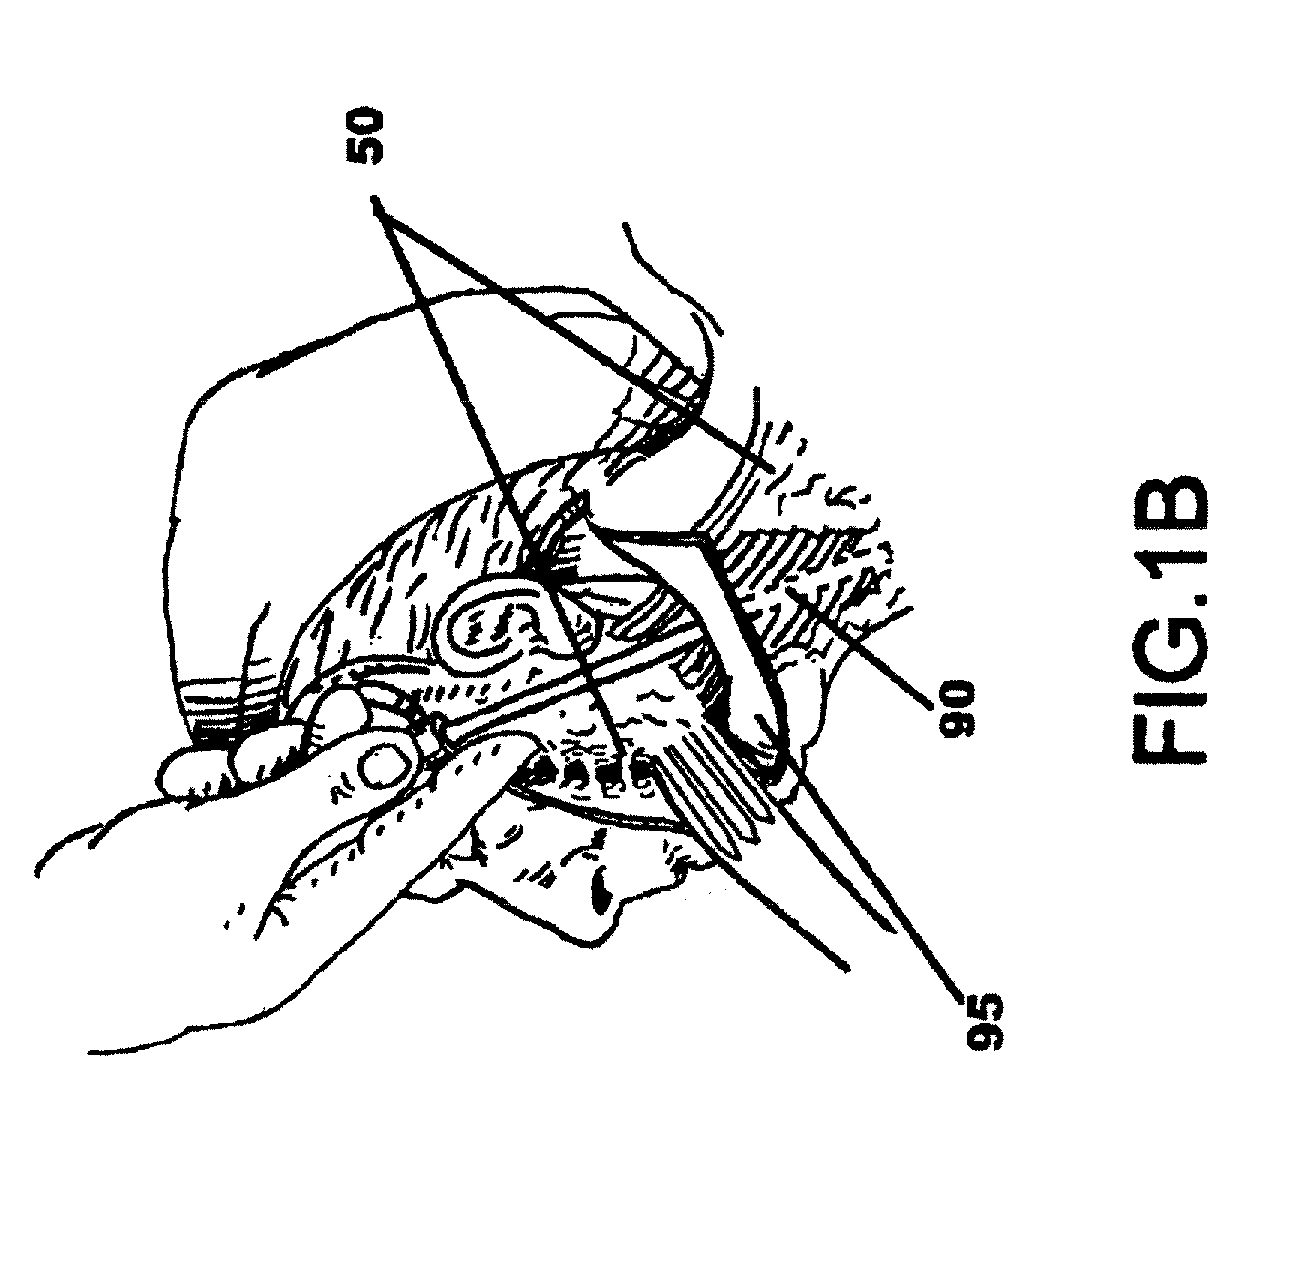 Facial tissue strengthening and tightening device and methods